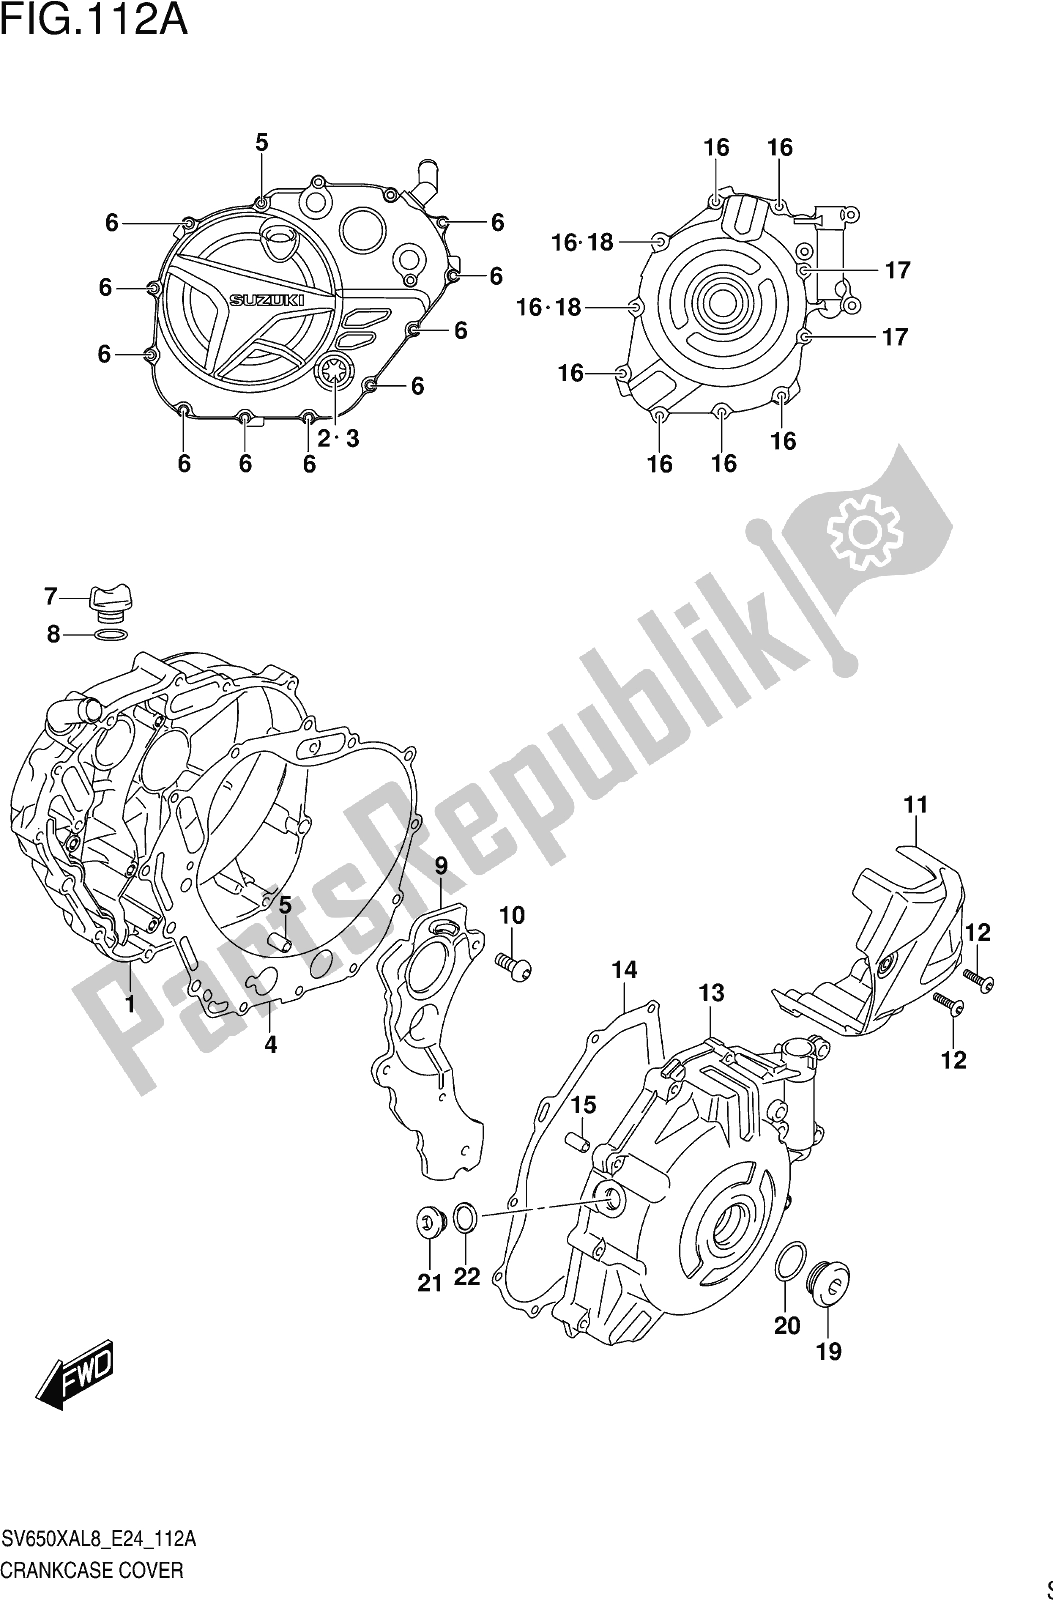 All parts for the Fig. 112a Crankcase Cover of the Suzuki SV 650 XA 2018